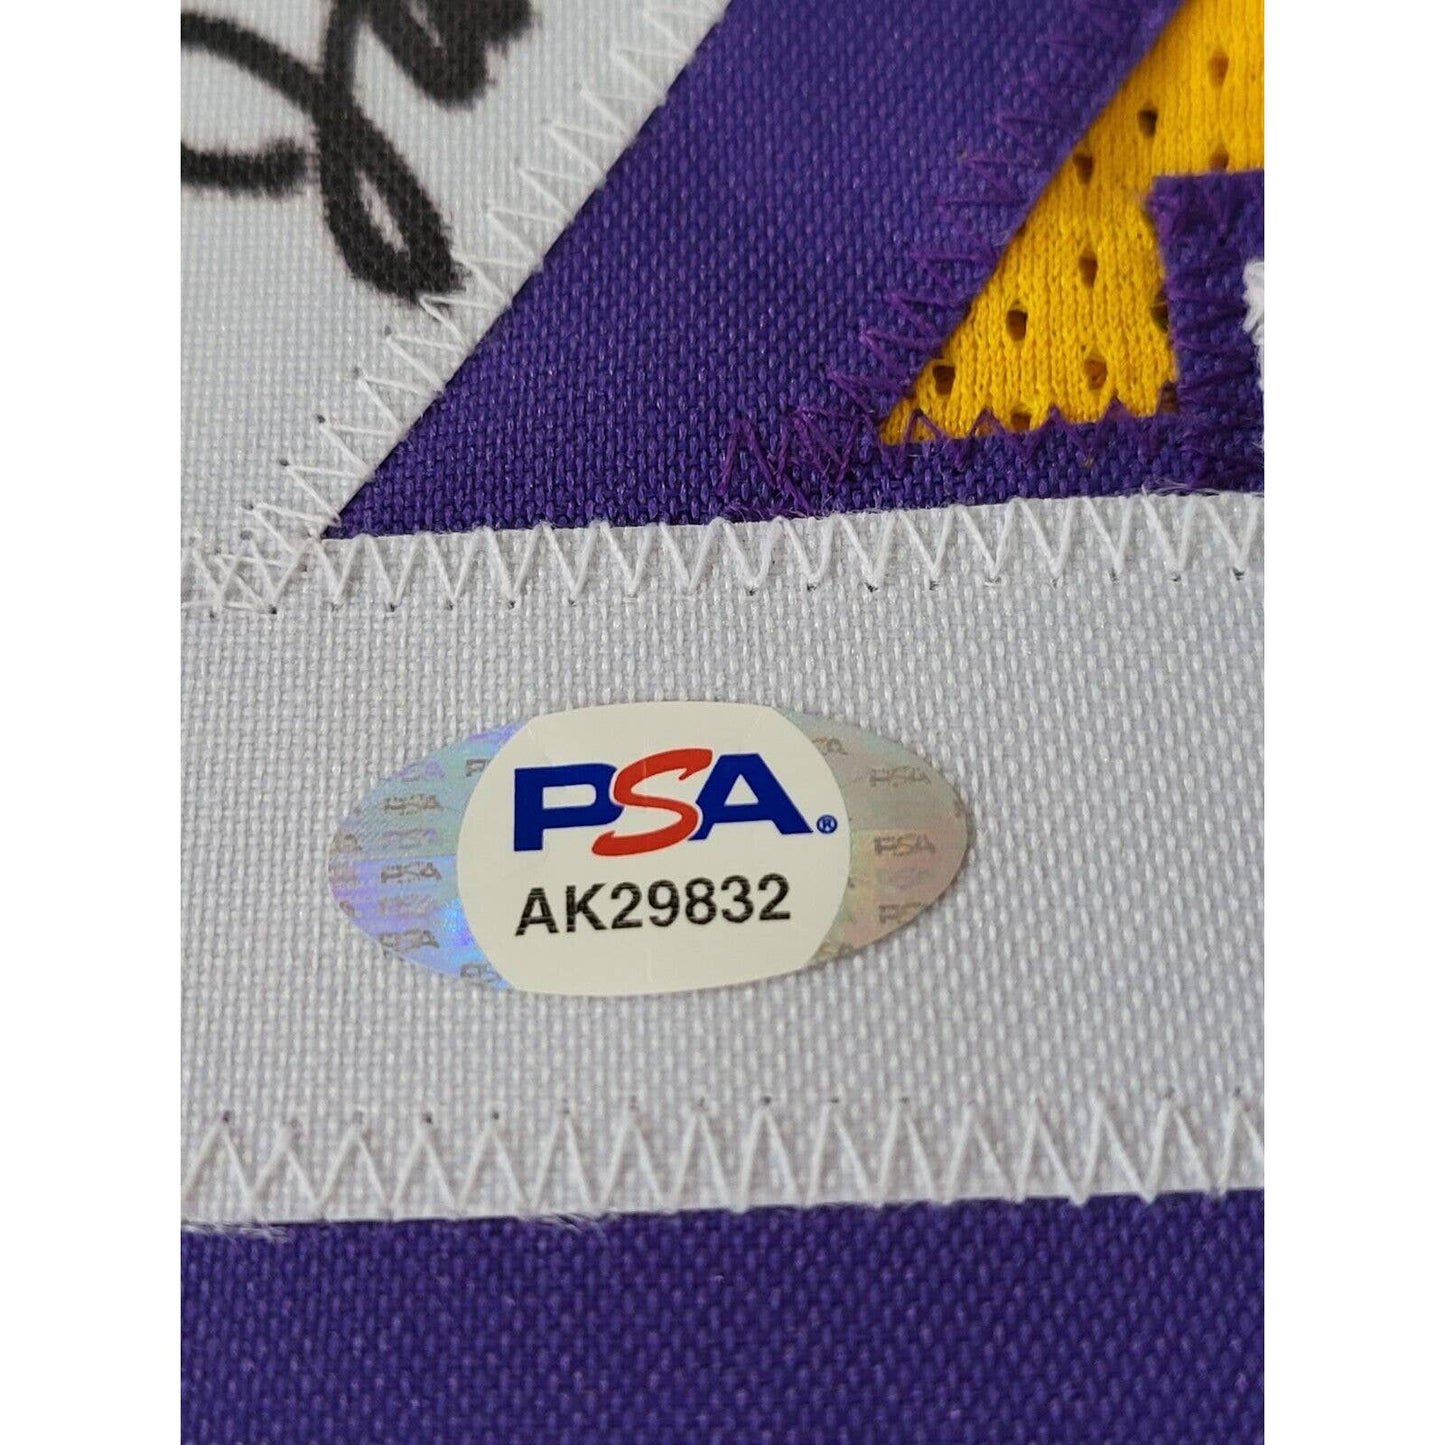 Jamaal Wilkes Autographed/Signed Jersey PSA/DNA Sticker Los Angeles Lakers LA - TreasuresEvolved